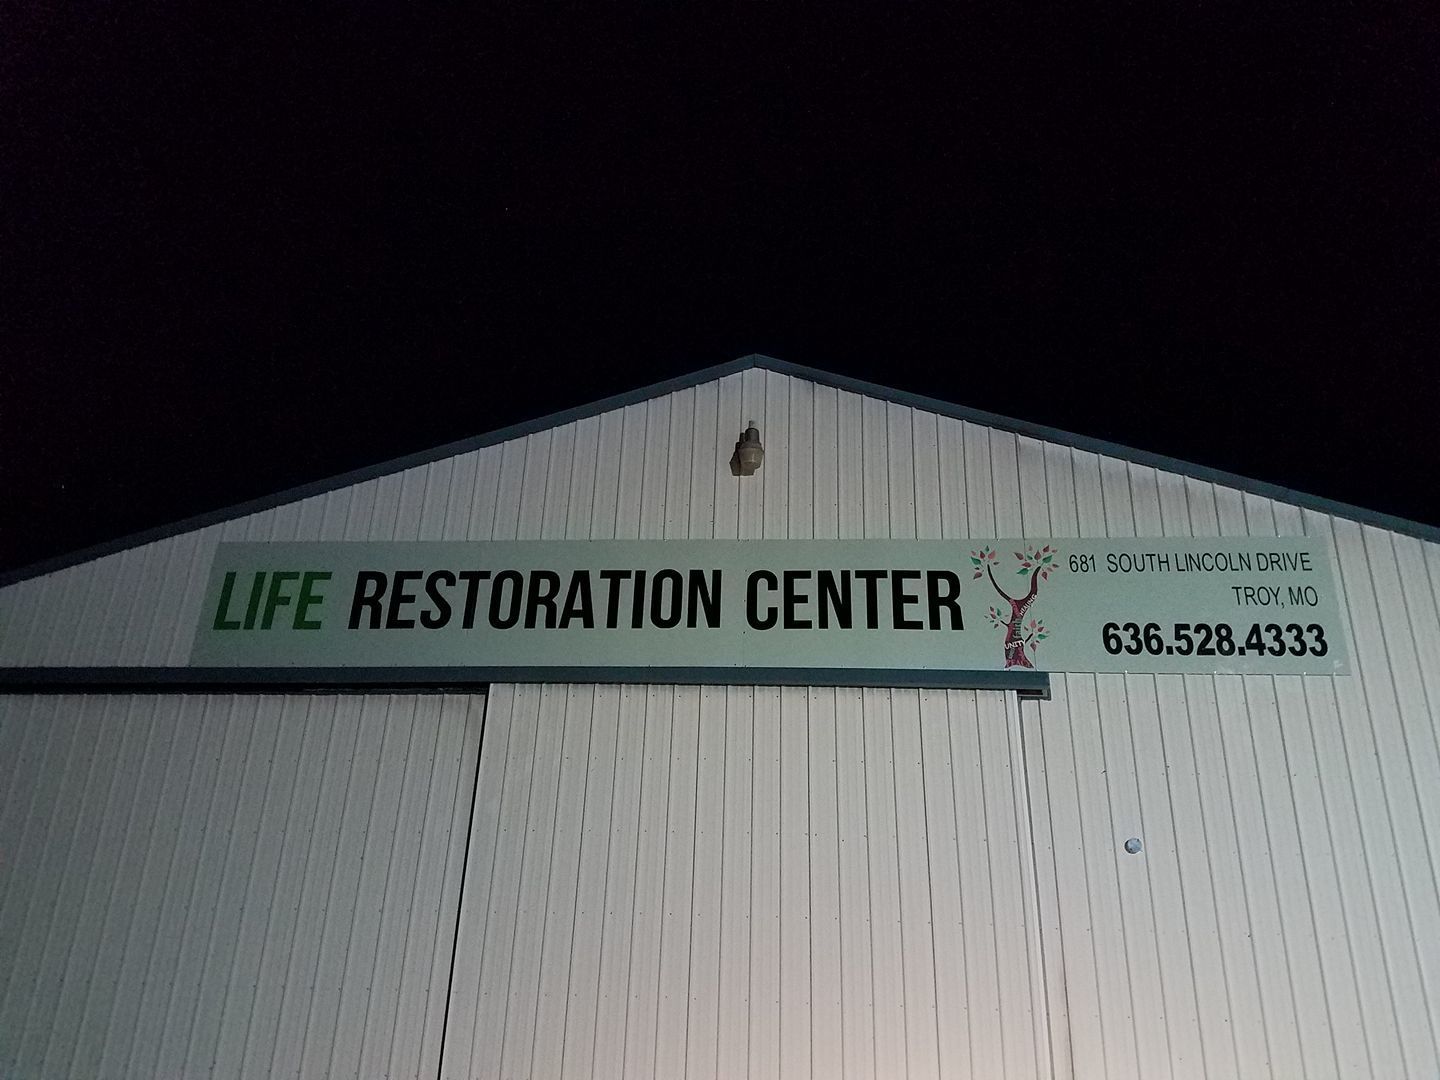 Gallery Photo of Life Restoration Center, Troy, MO